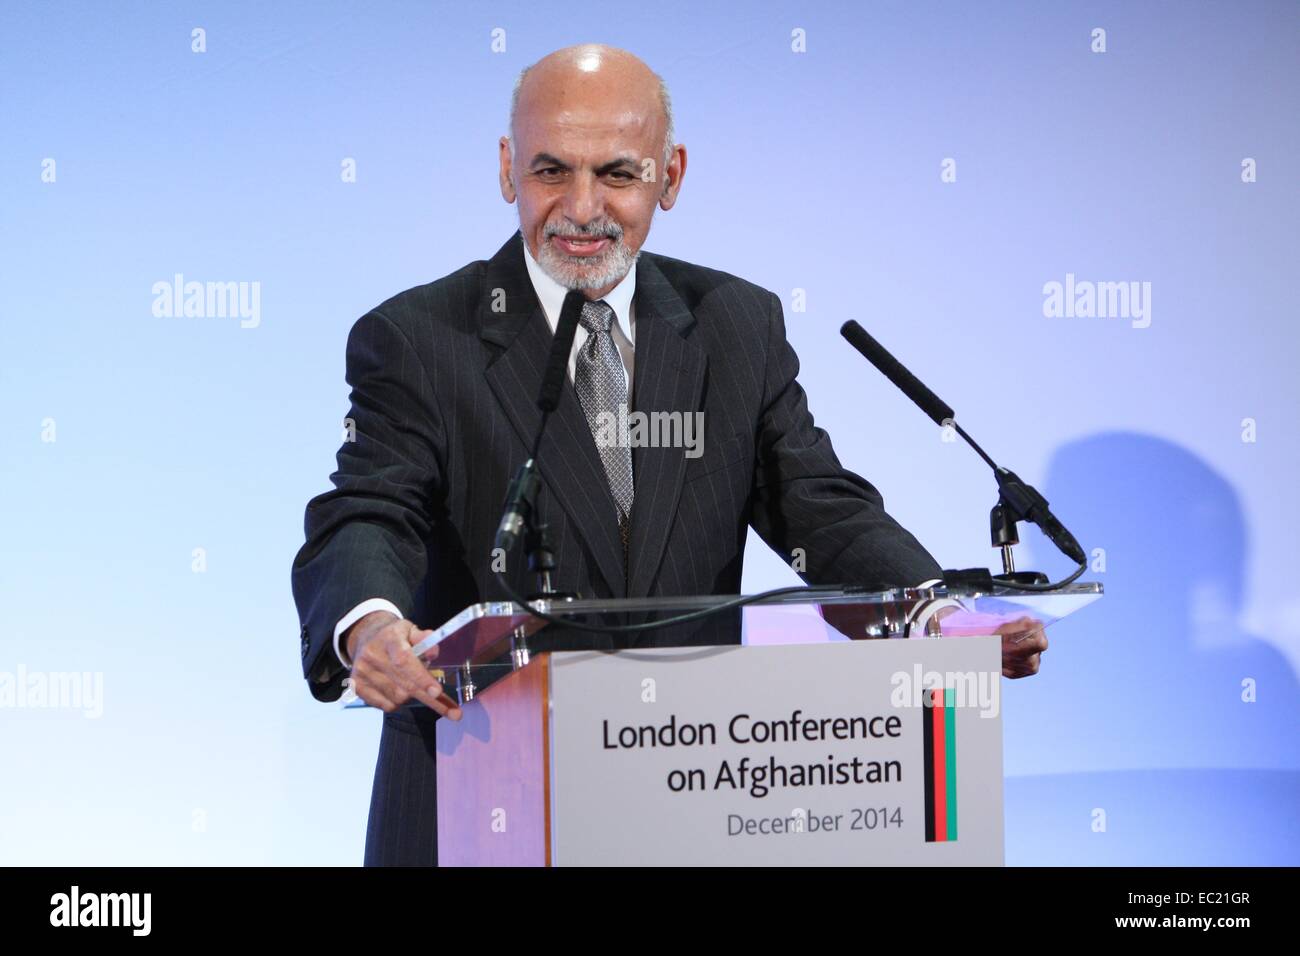 Afghan President Mohammad Ashraf Ghani during a press conference following the London Conference on Afghanistan December 4, 2014 in London. Stock Photo